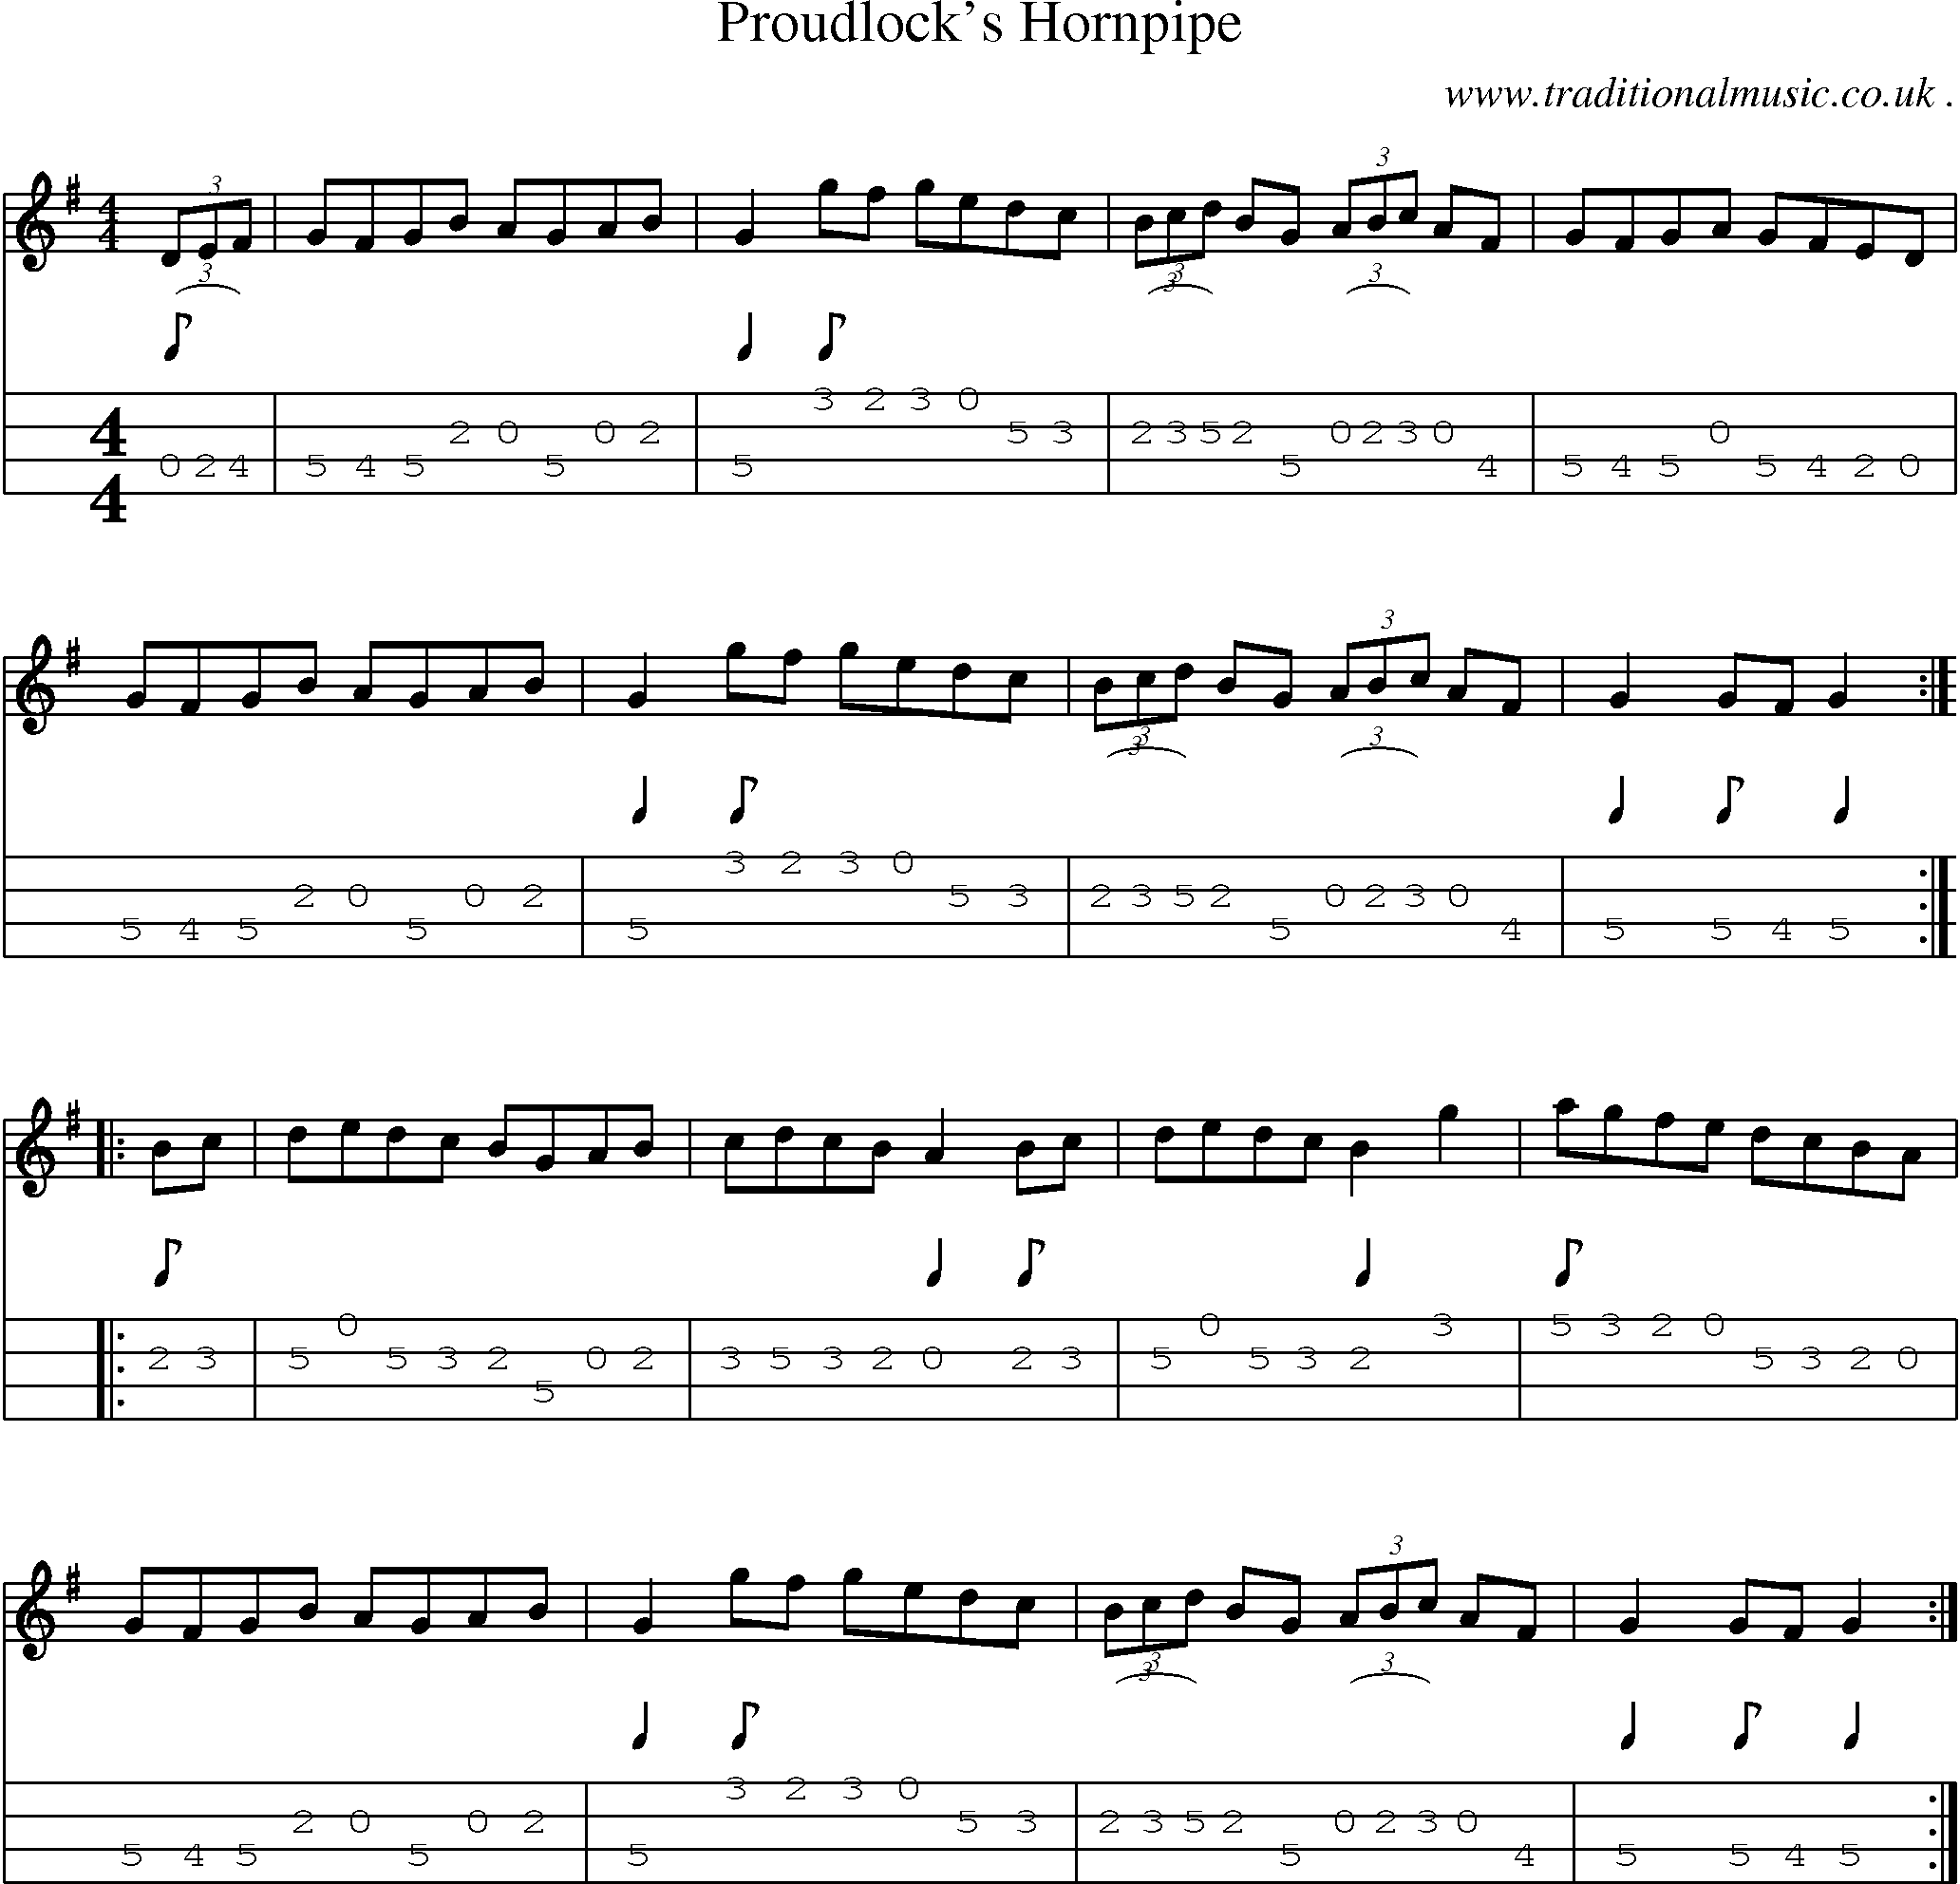 Sheet-Music and Mandolin Tabs for Proudlocks Hornpipe